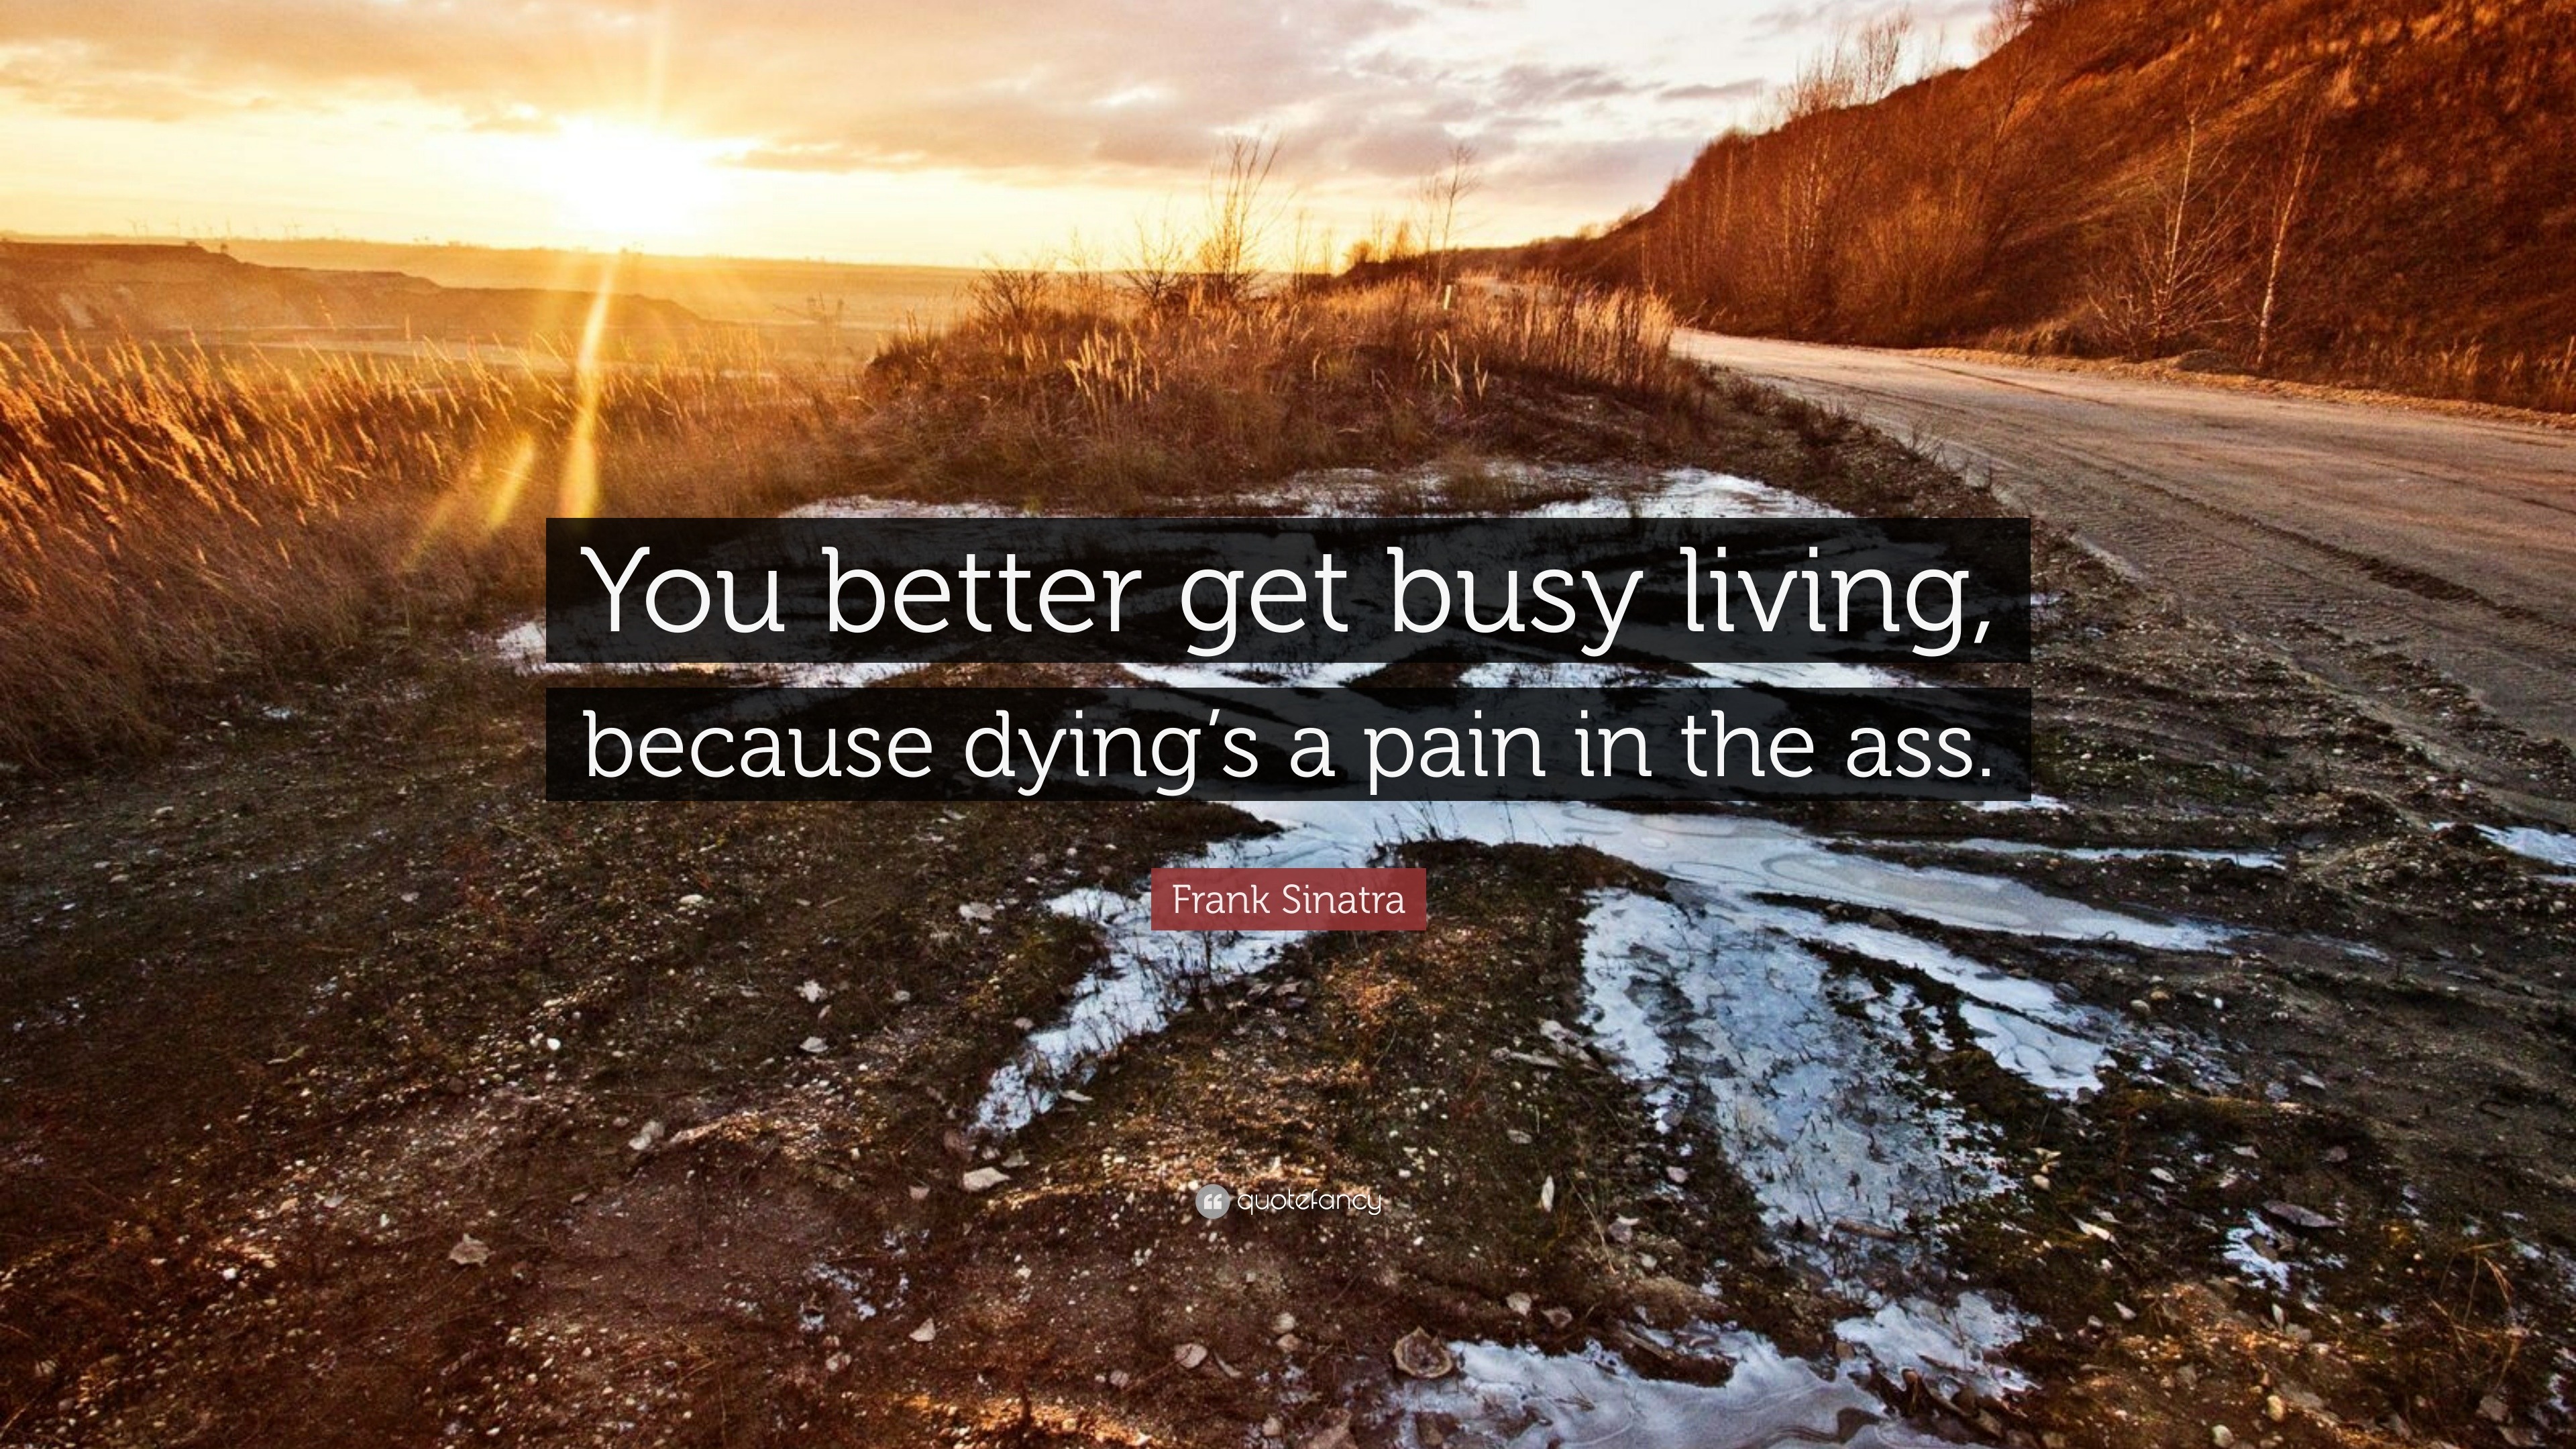 Frank Sinatra Quote You Better Get Busy Living Because Dying S A Pain In The Ass